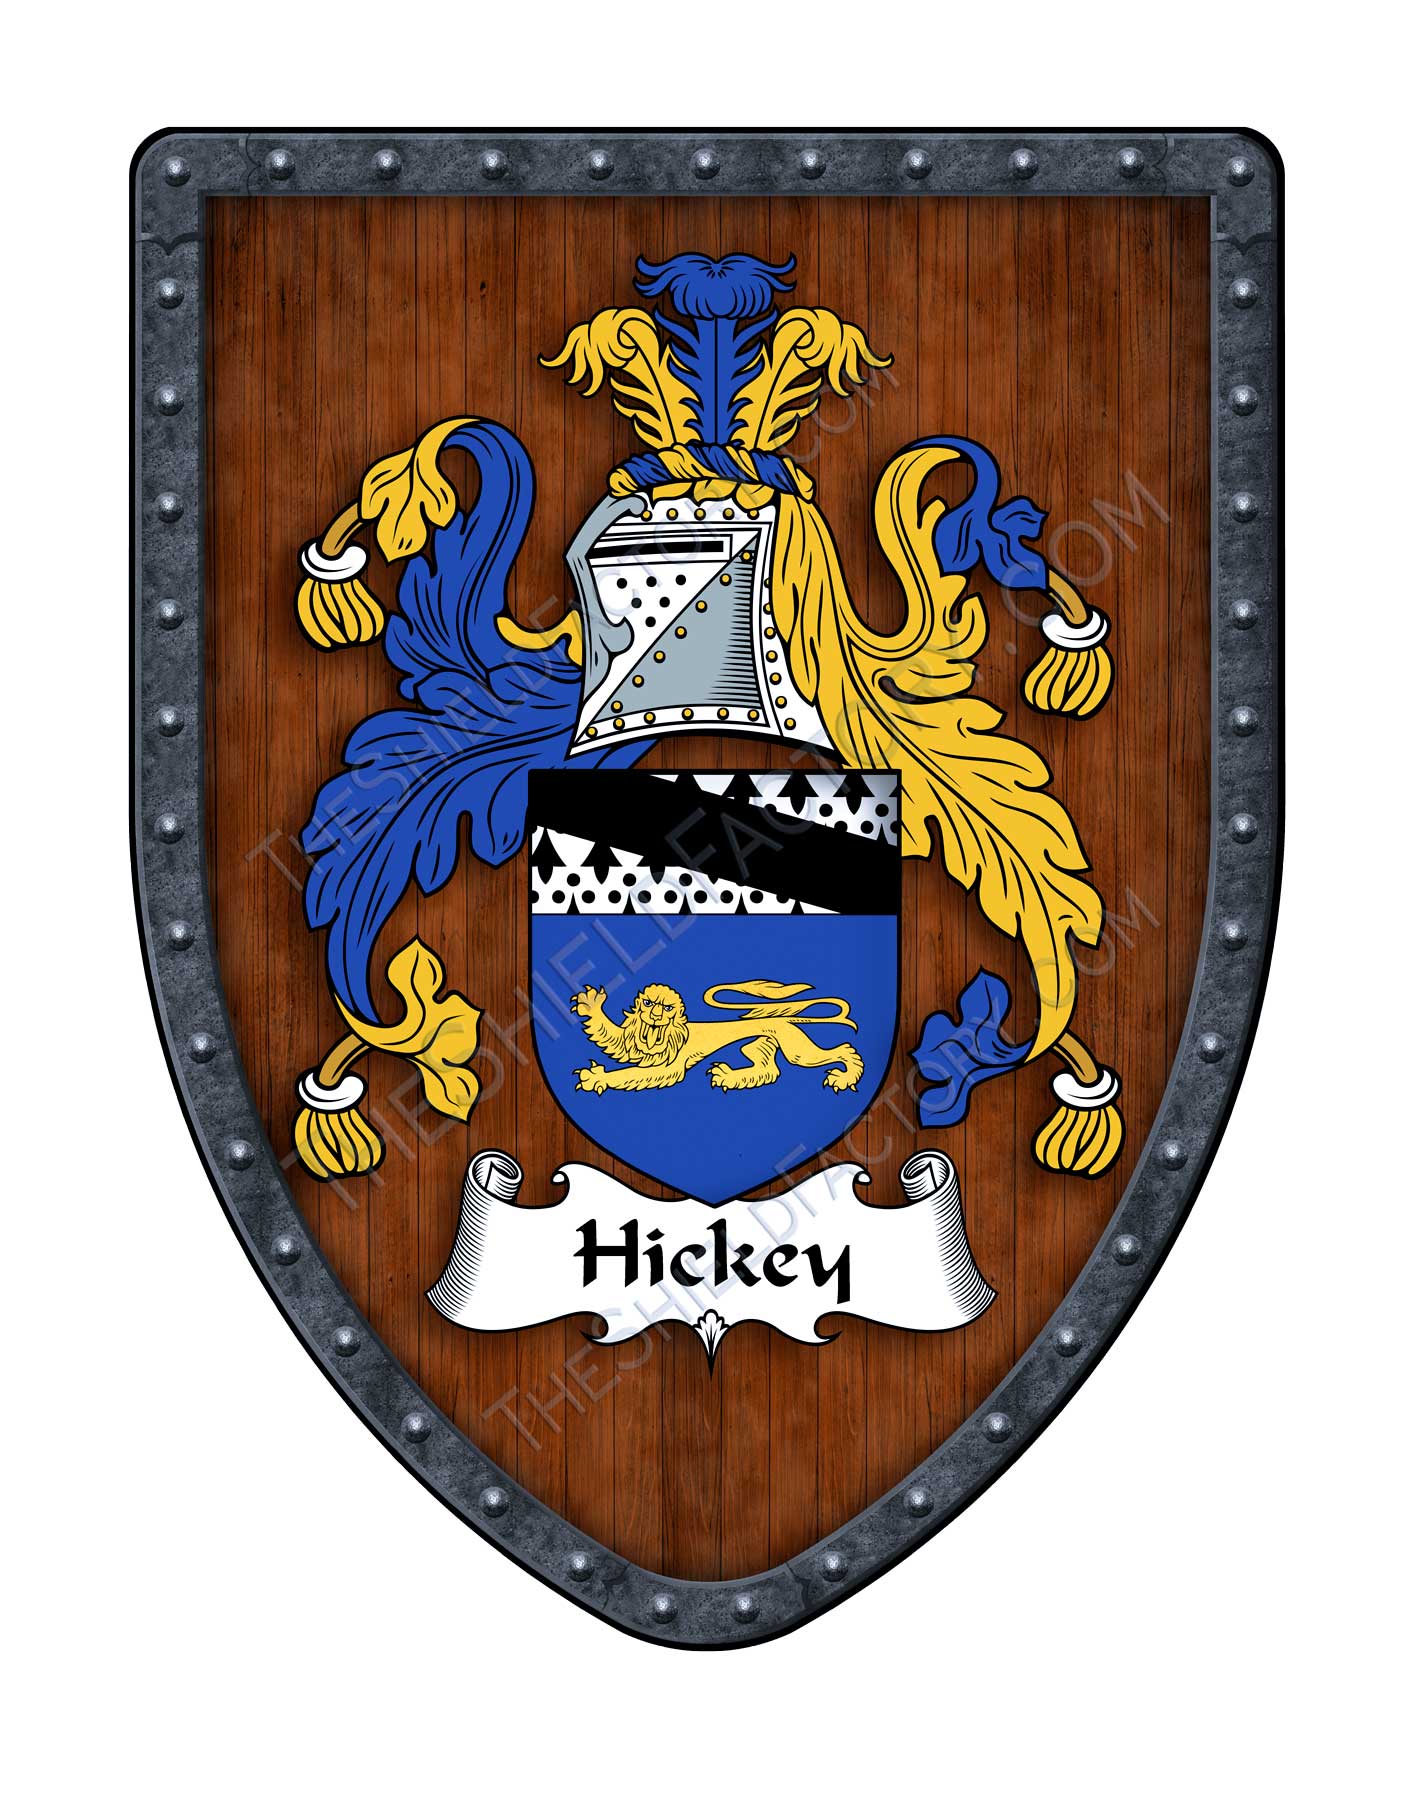 Hickey O'Hickey Family Coat of Arms Family Crest – My Family Coat Of Arms